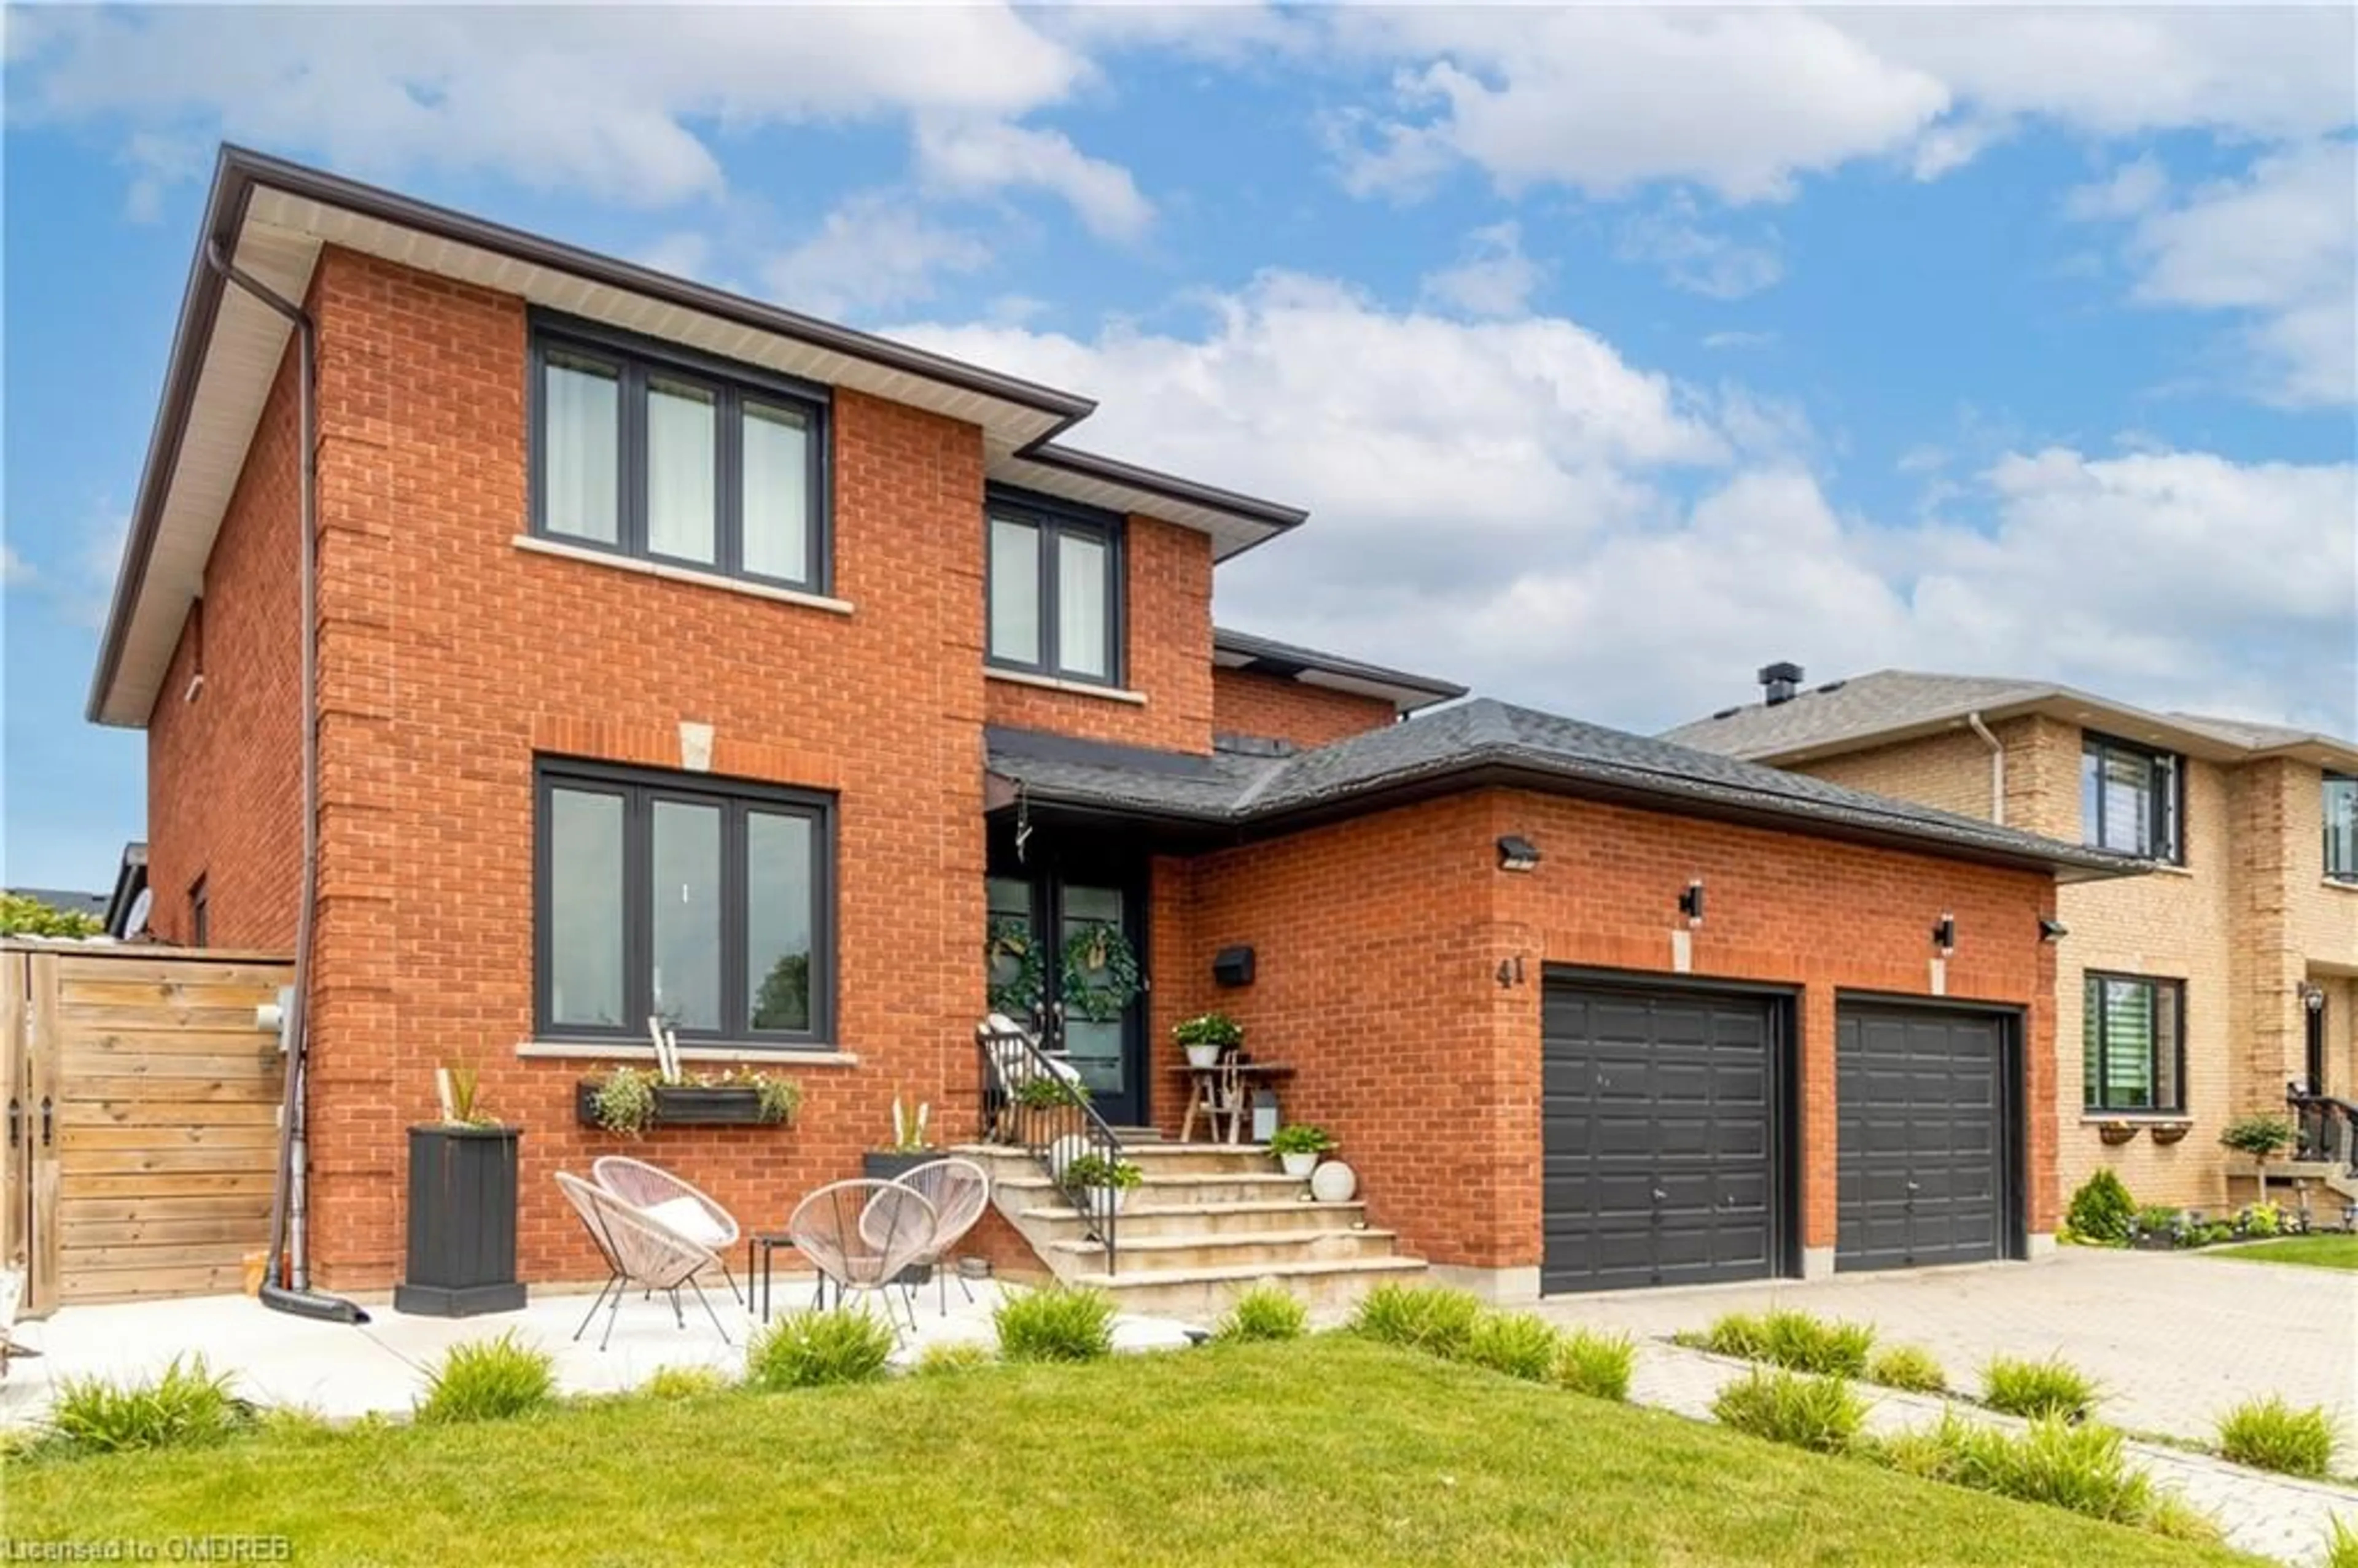 Home with brick exterior material for 41 Regalview Dr, Stoney Creek Ontario L8G 4Y6